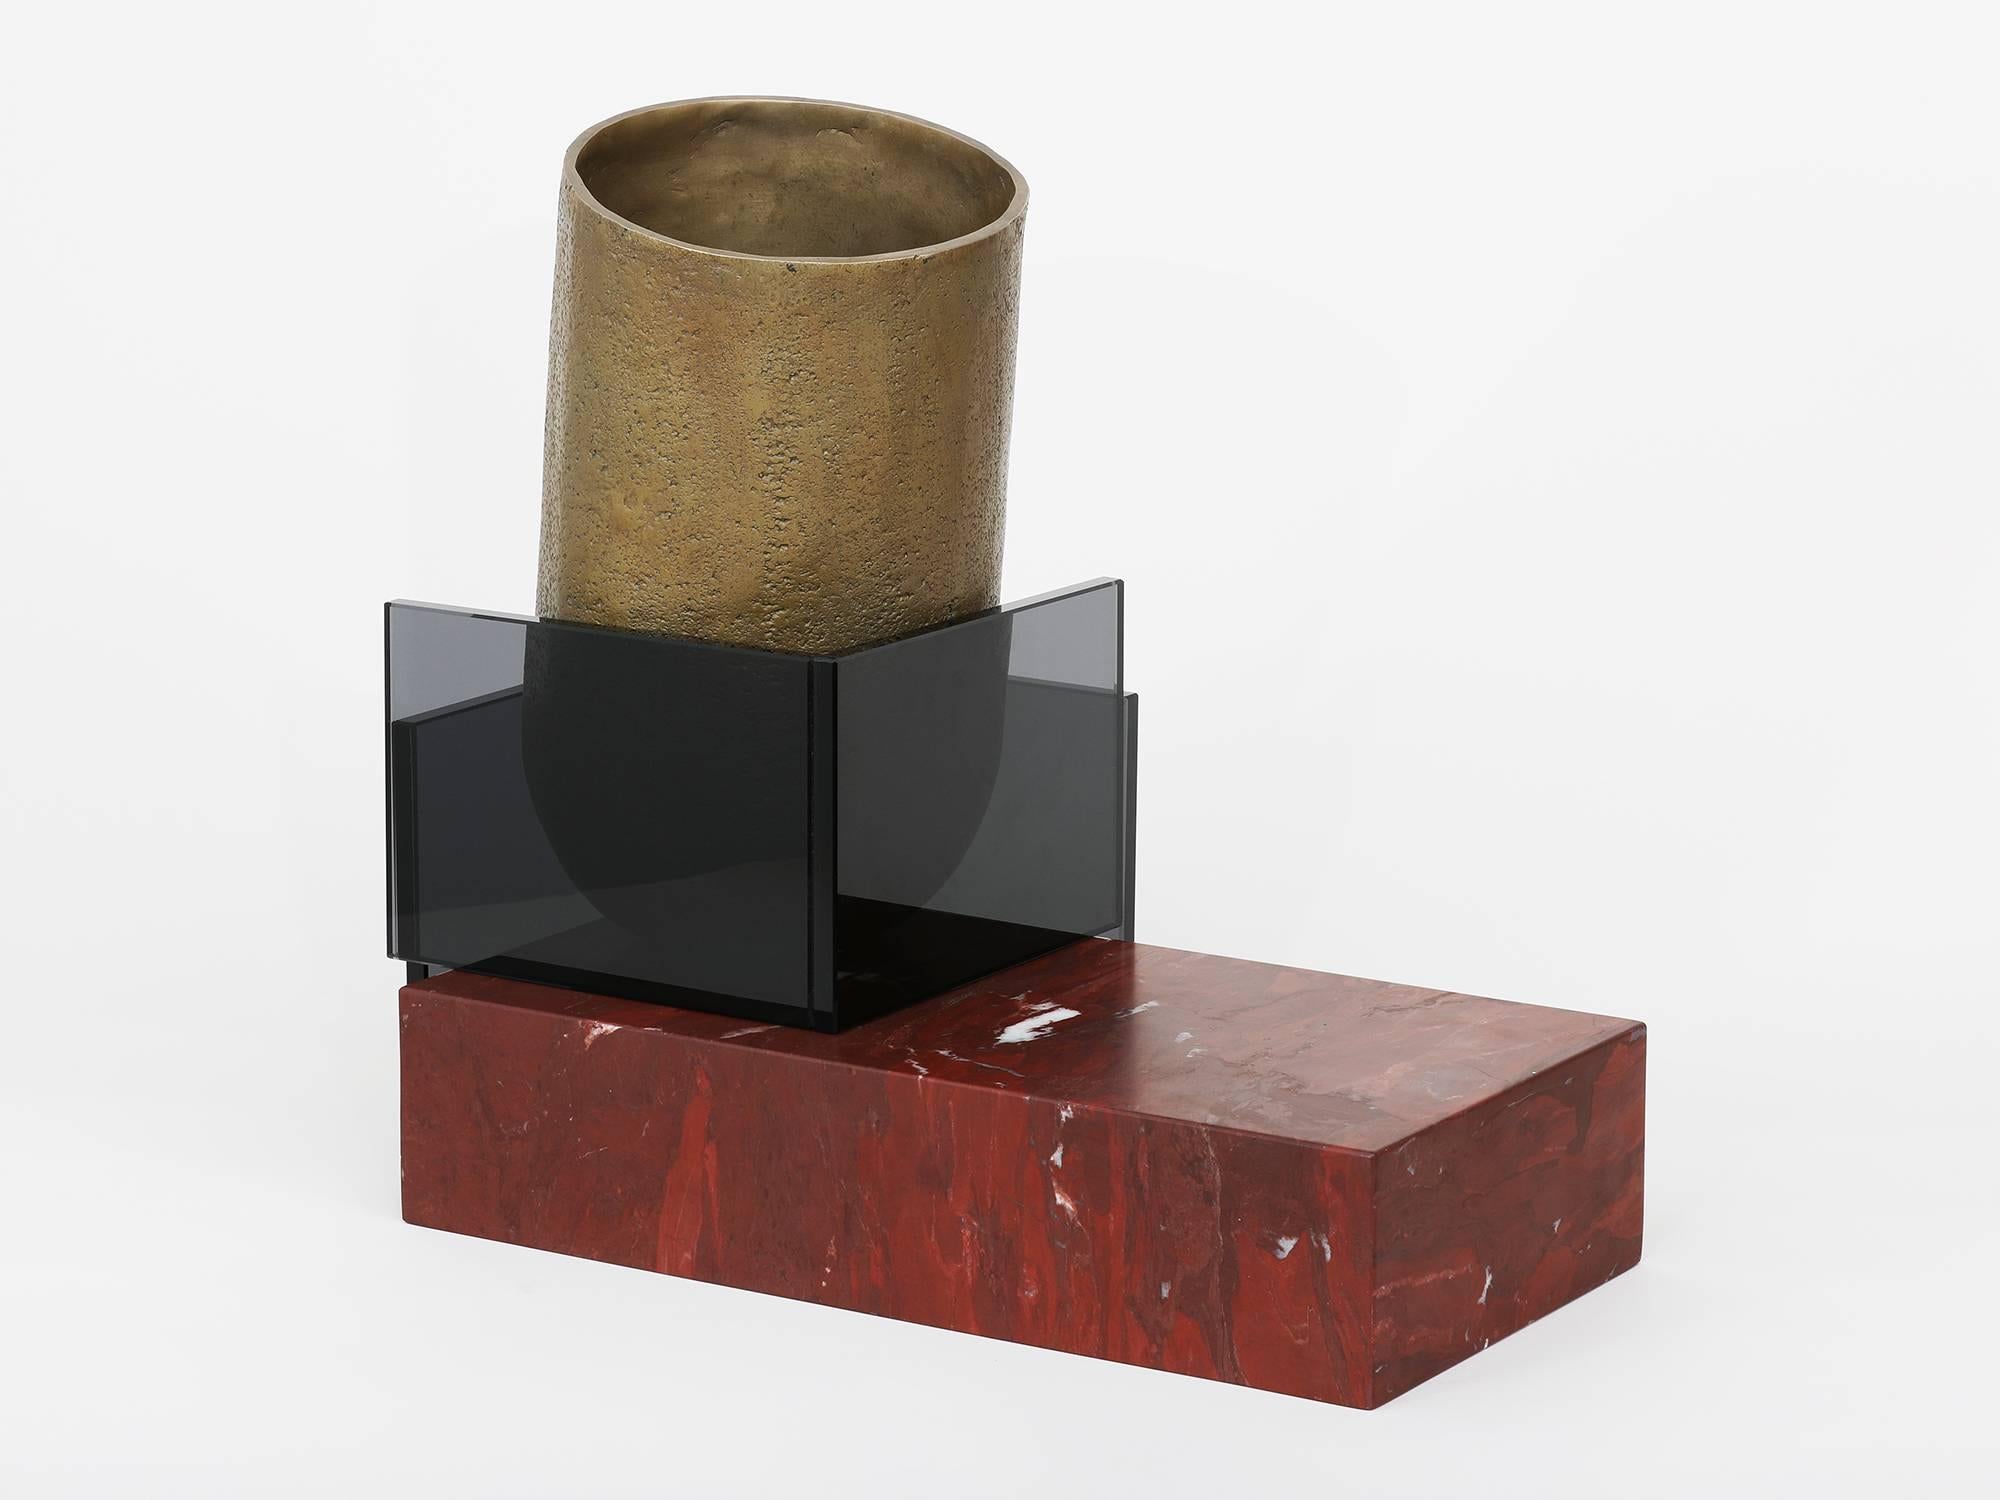 One of three vessels developed as the material maquette's for Brian Thoreen's larger works. Comprised of a cast bronze vessel, red marble and grey glass. Also available in brown or grey marble and bronze glass. Edition of 5 + I AP.